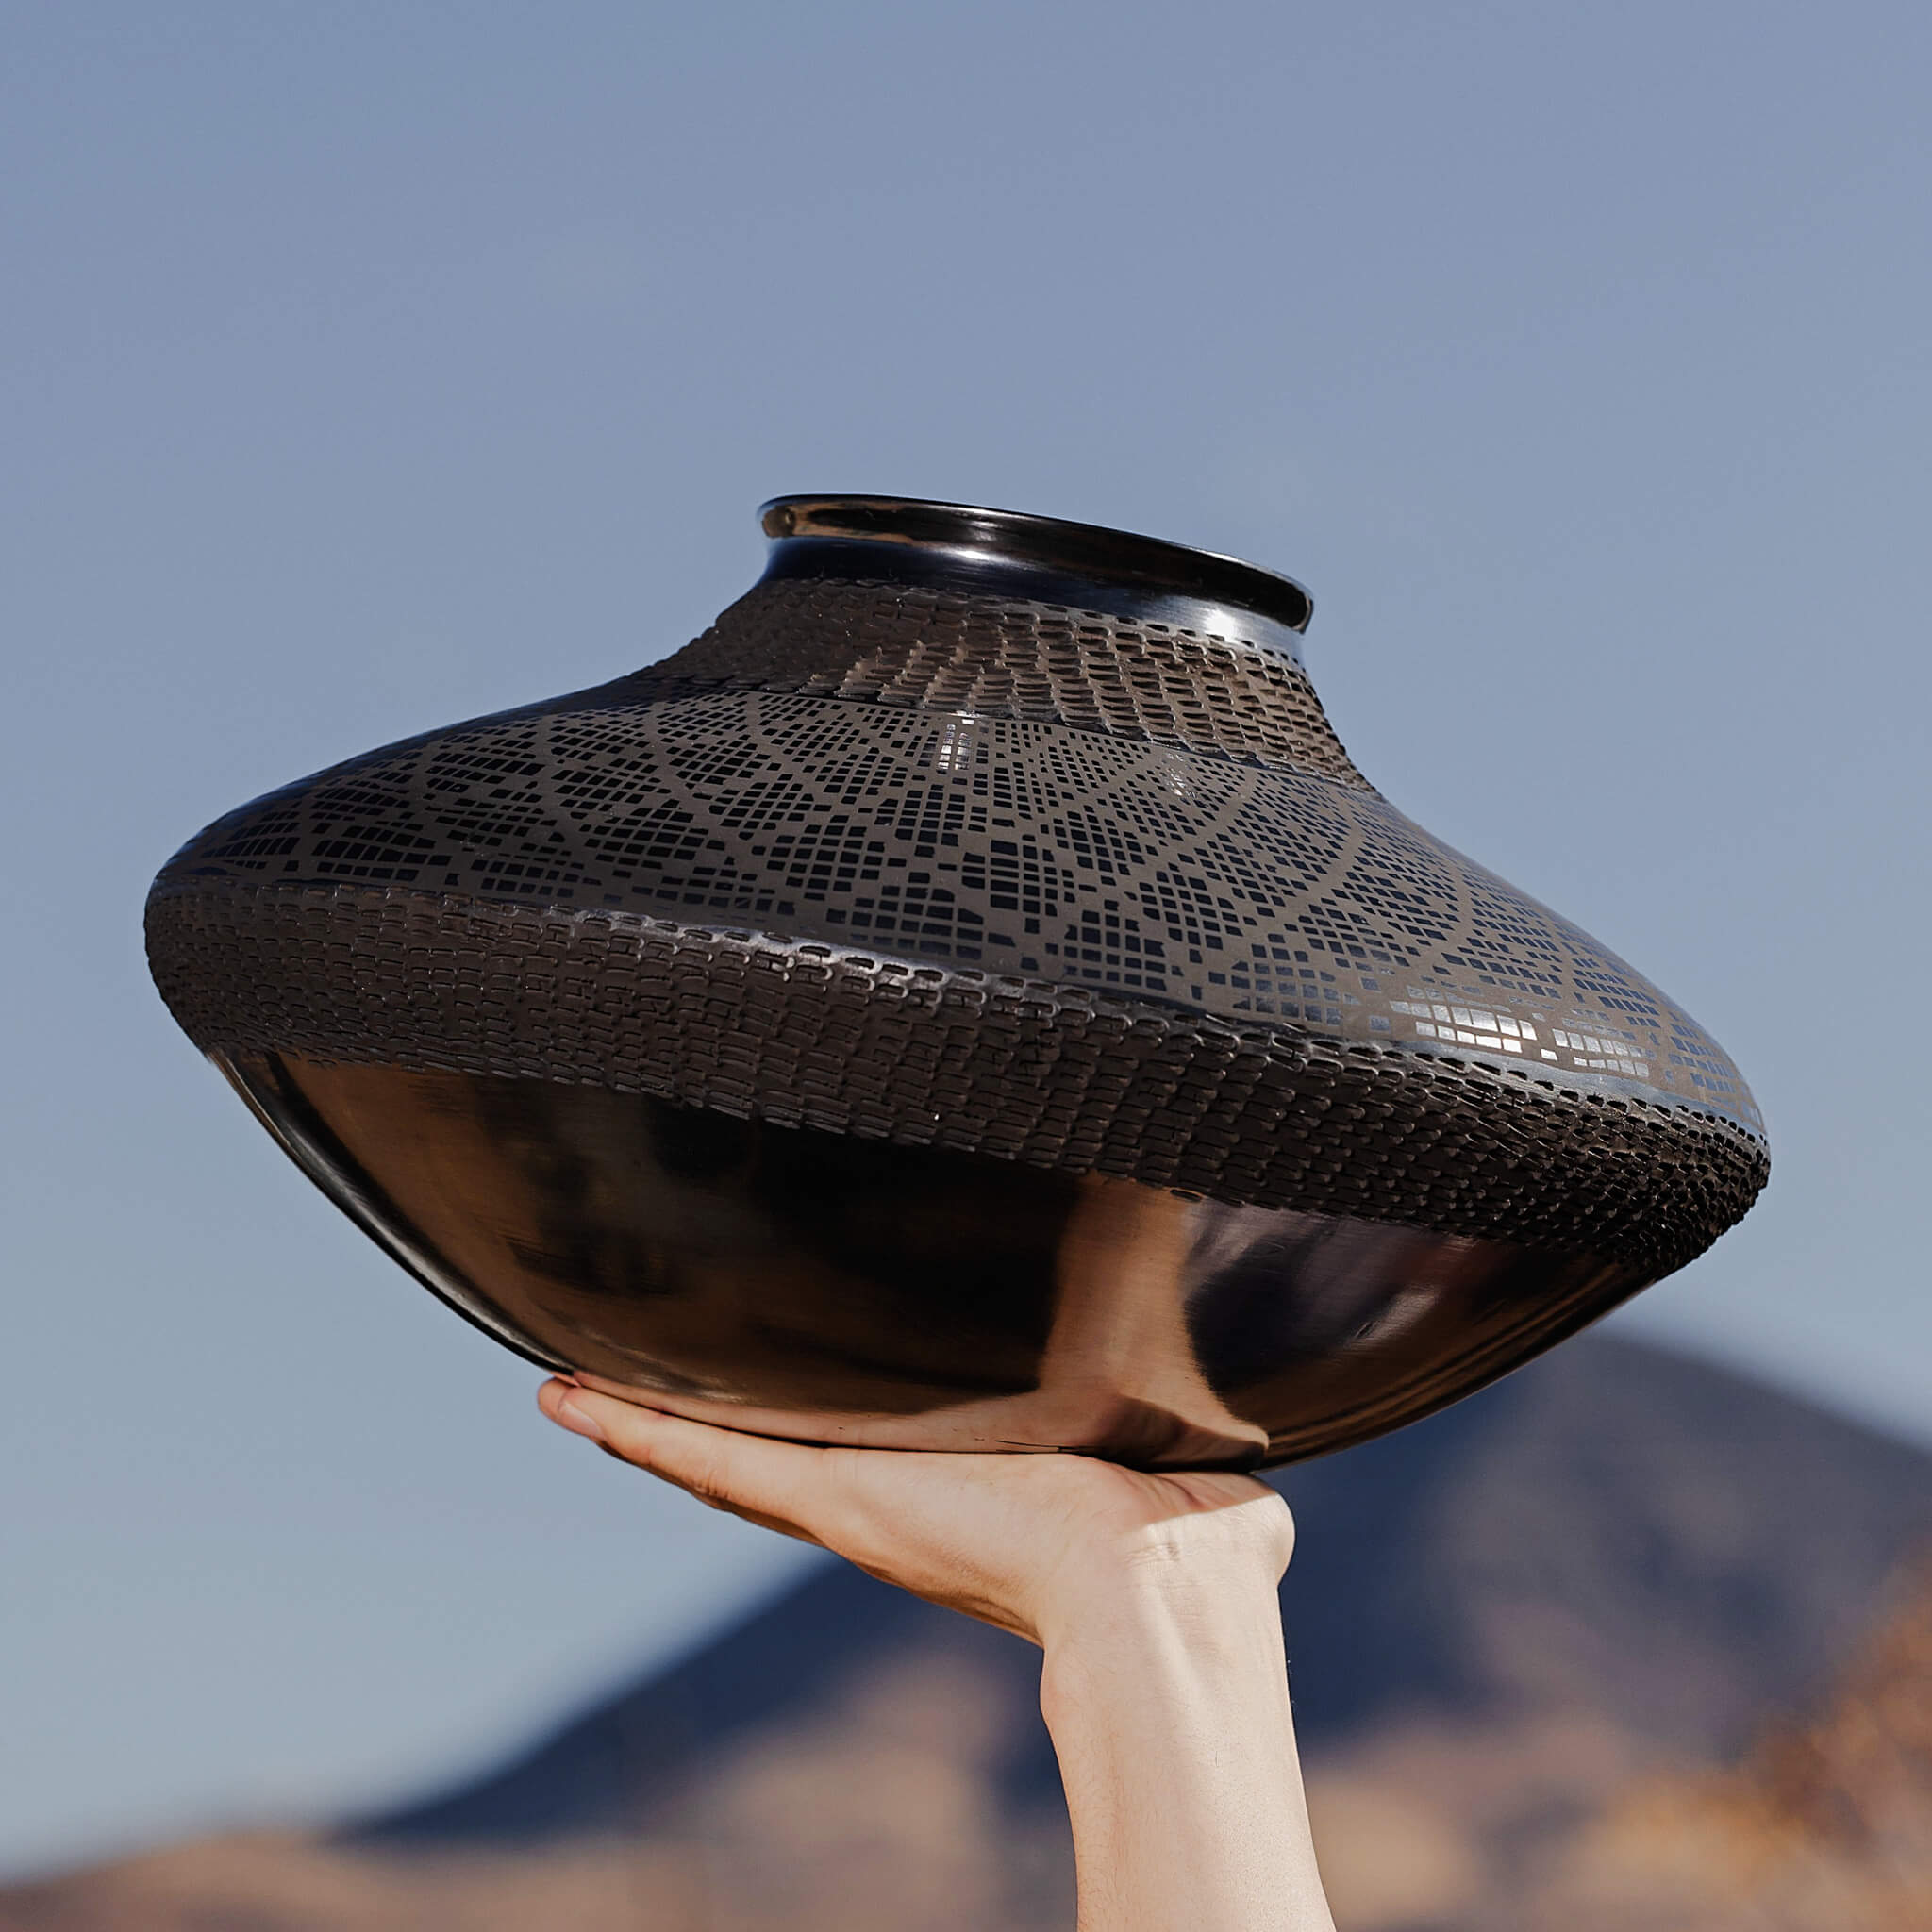 A large Mata Ortiz spheroid shaped vase held in a hand against a mountainous backdrop.